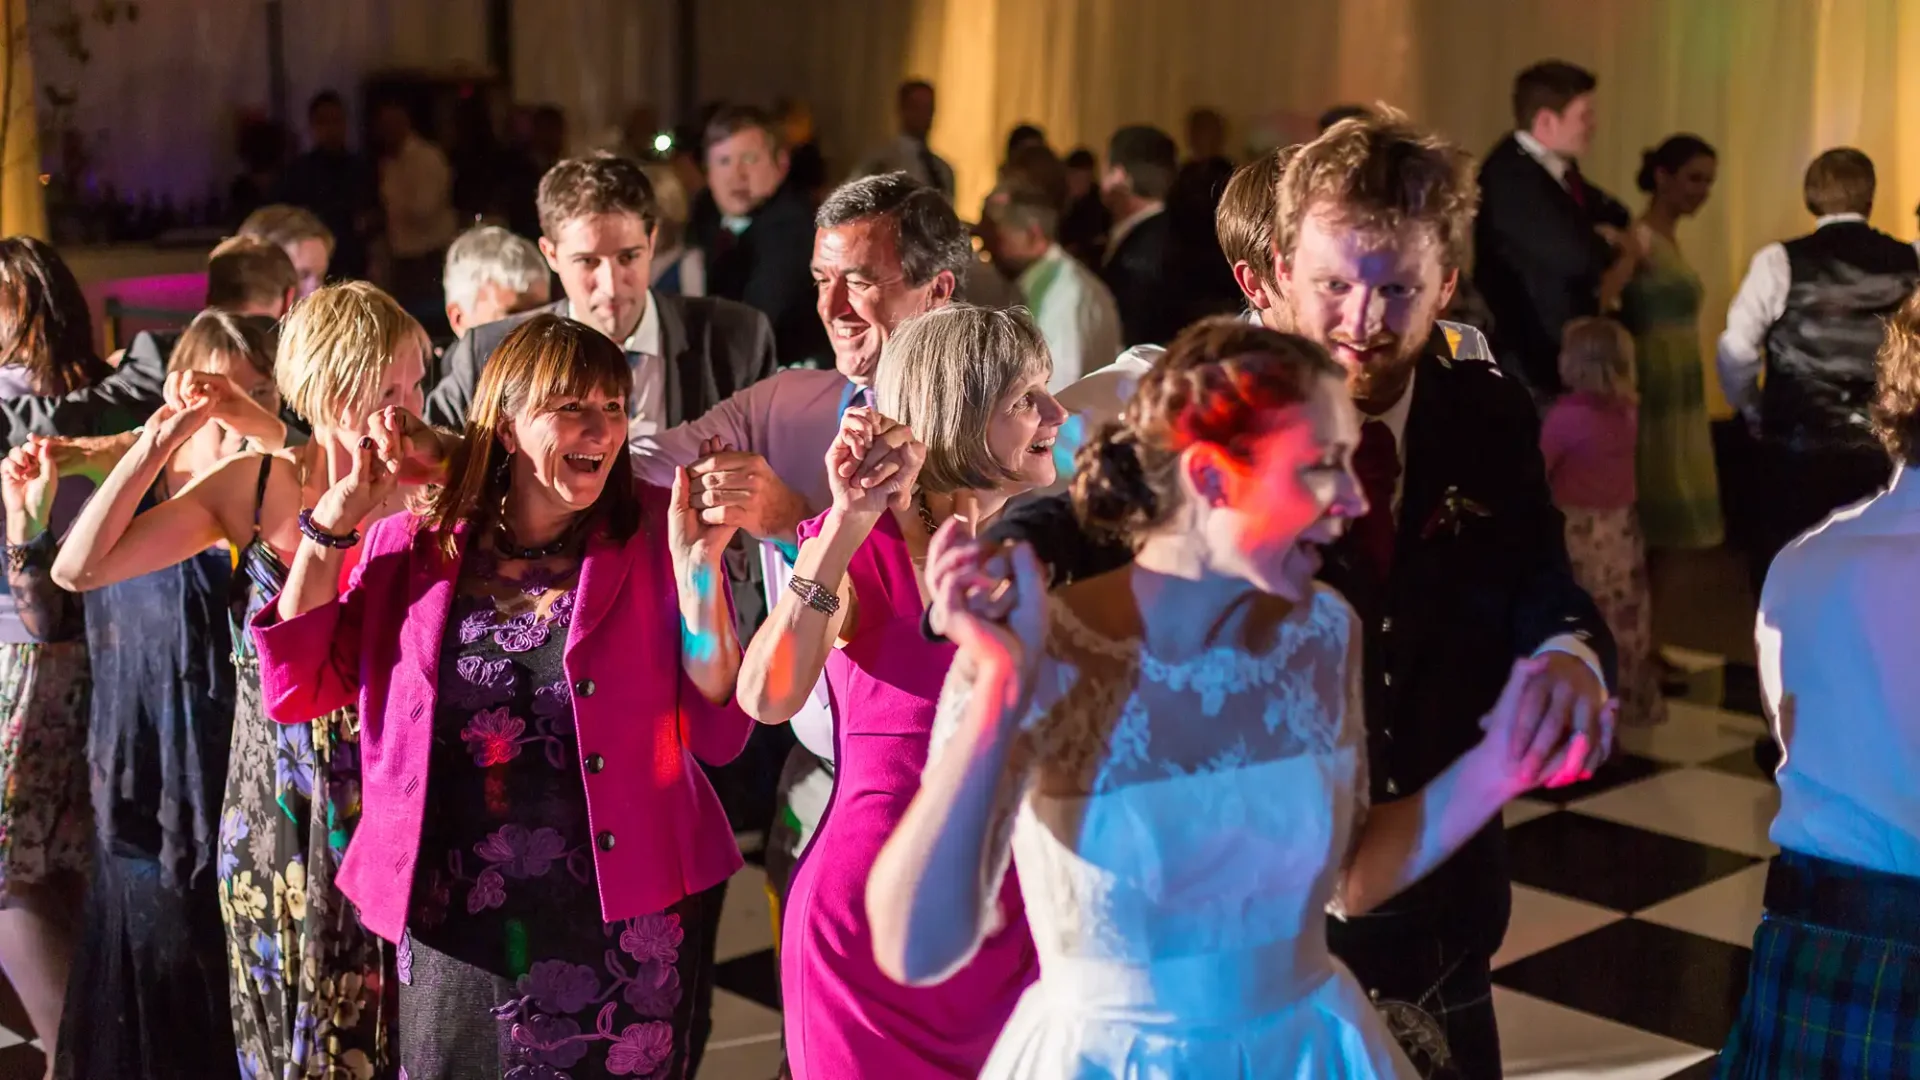 Guests dancing joyfully at a wedding reception, with a focus on a diverse group of adults in evening attire.